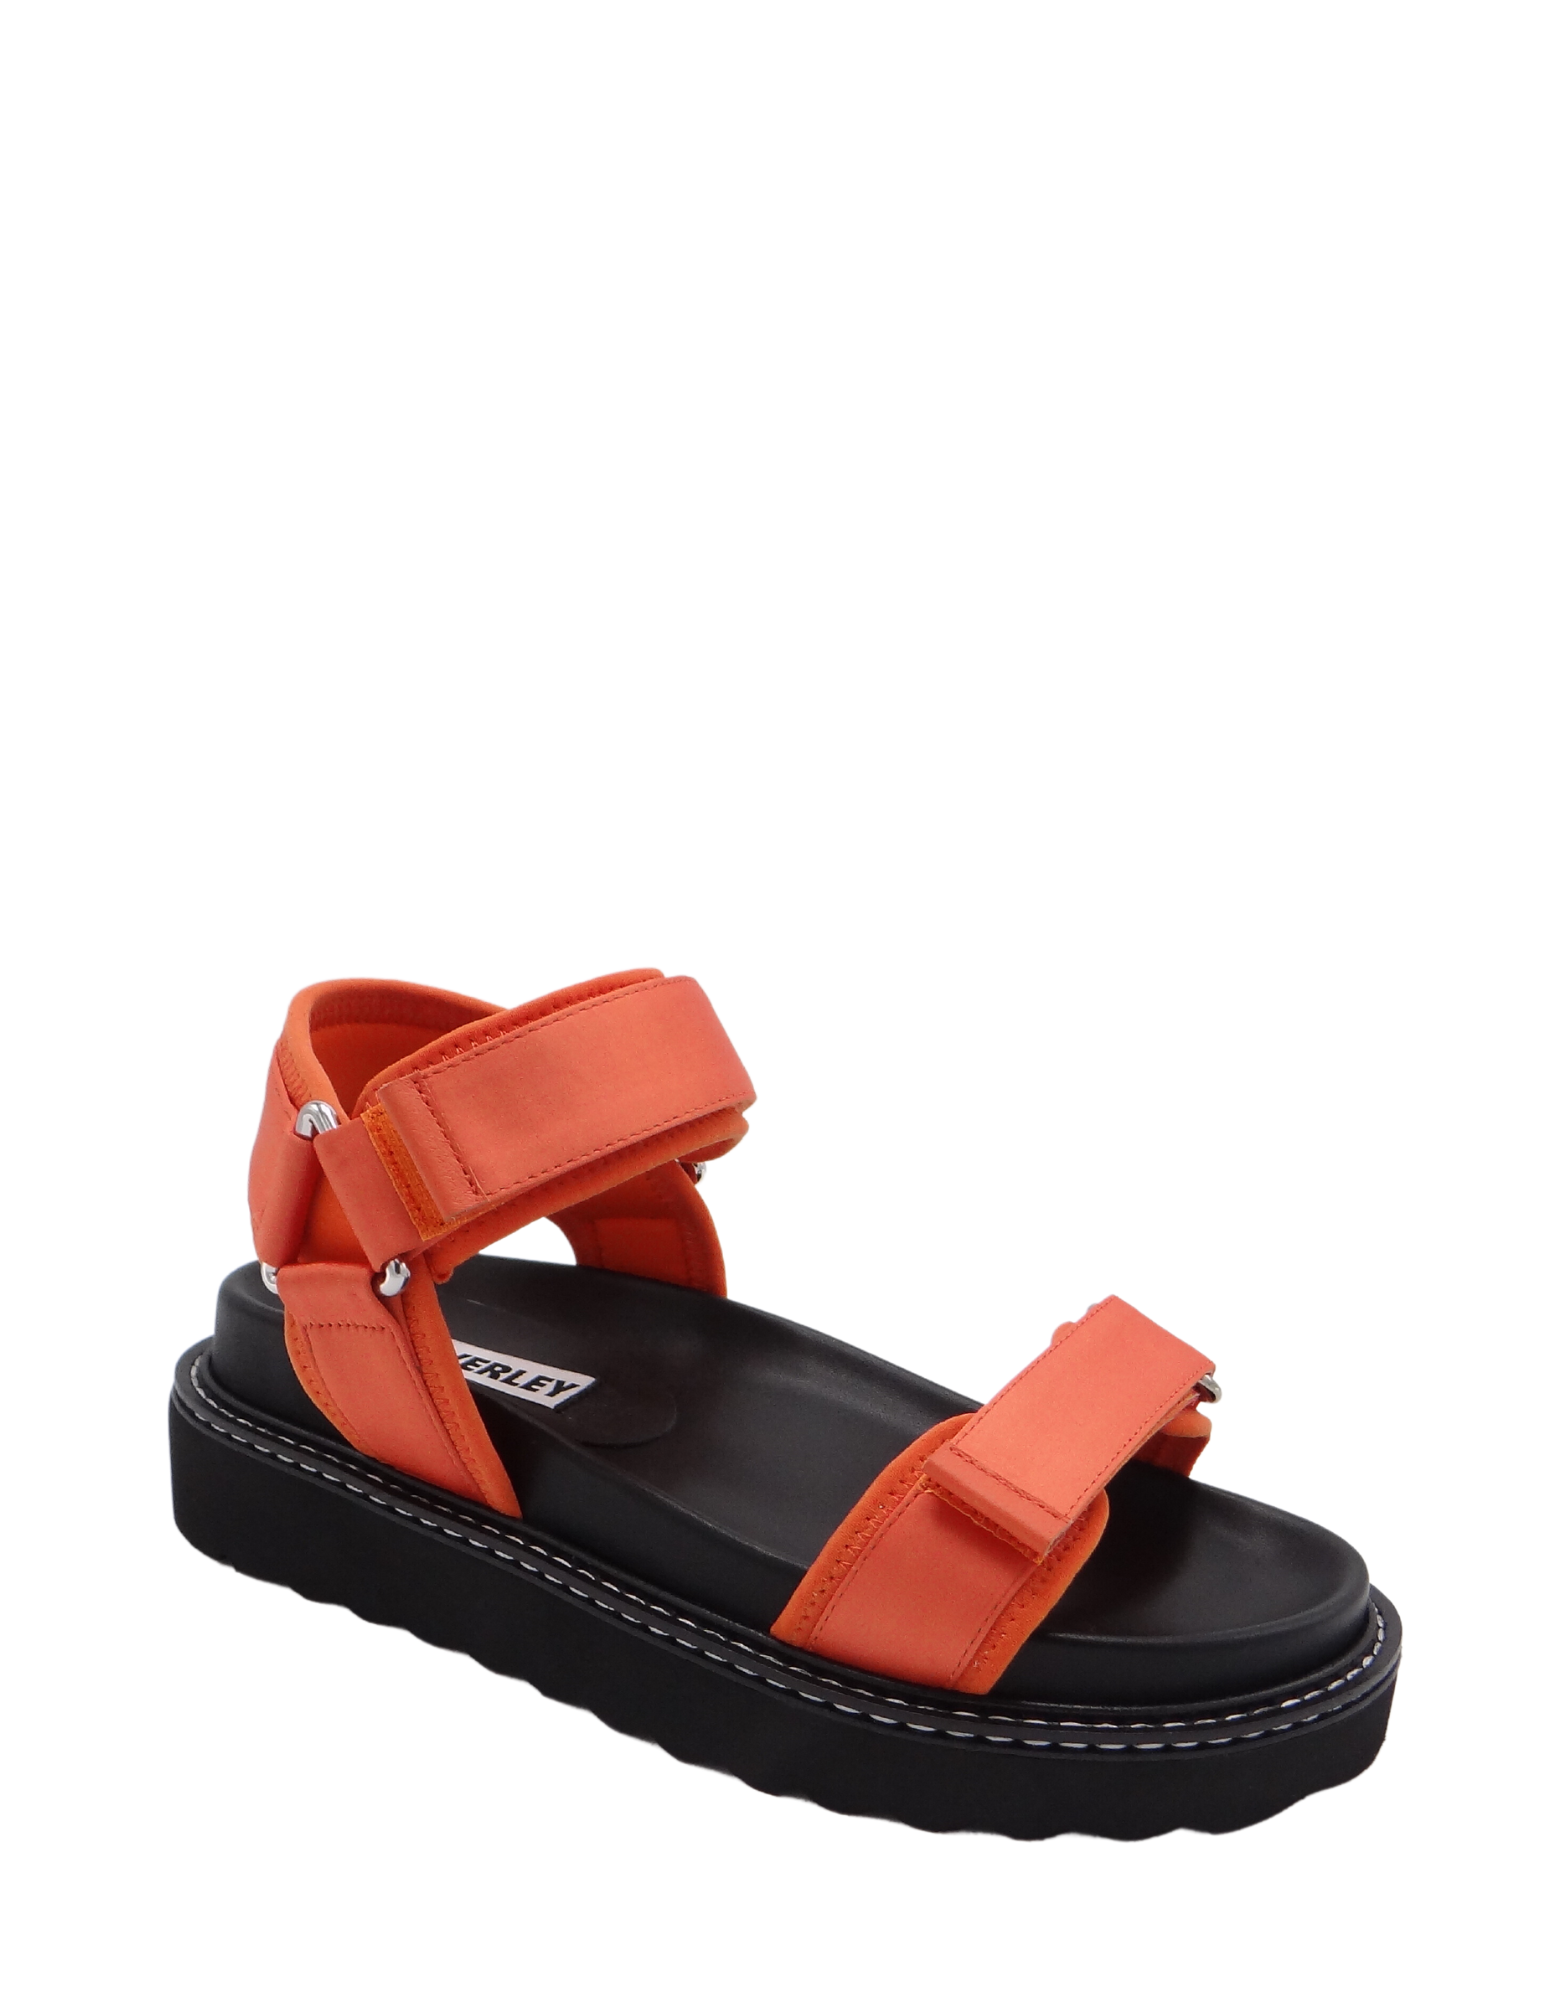 Parallel Culture Shoes and Fashion Online SANDALS CAVERLY RONI SANDAL RED